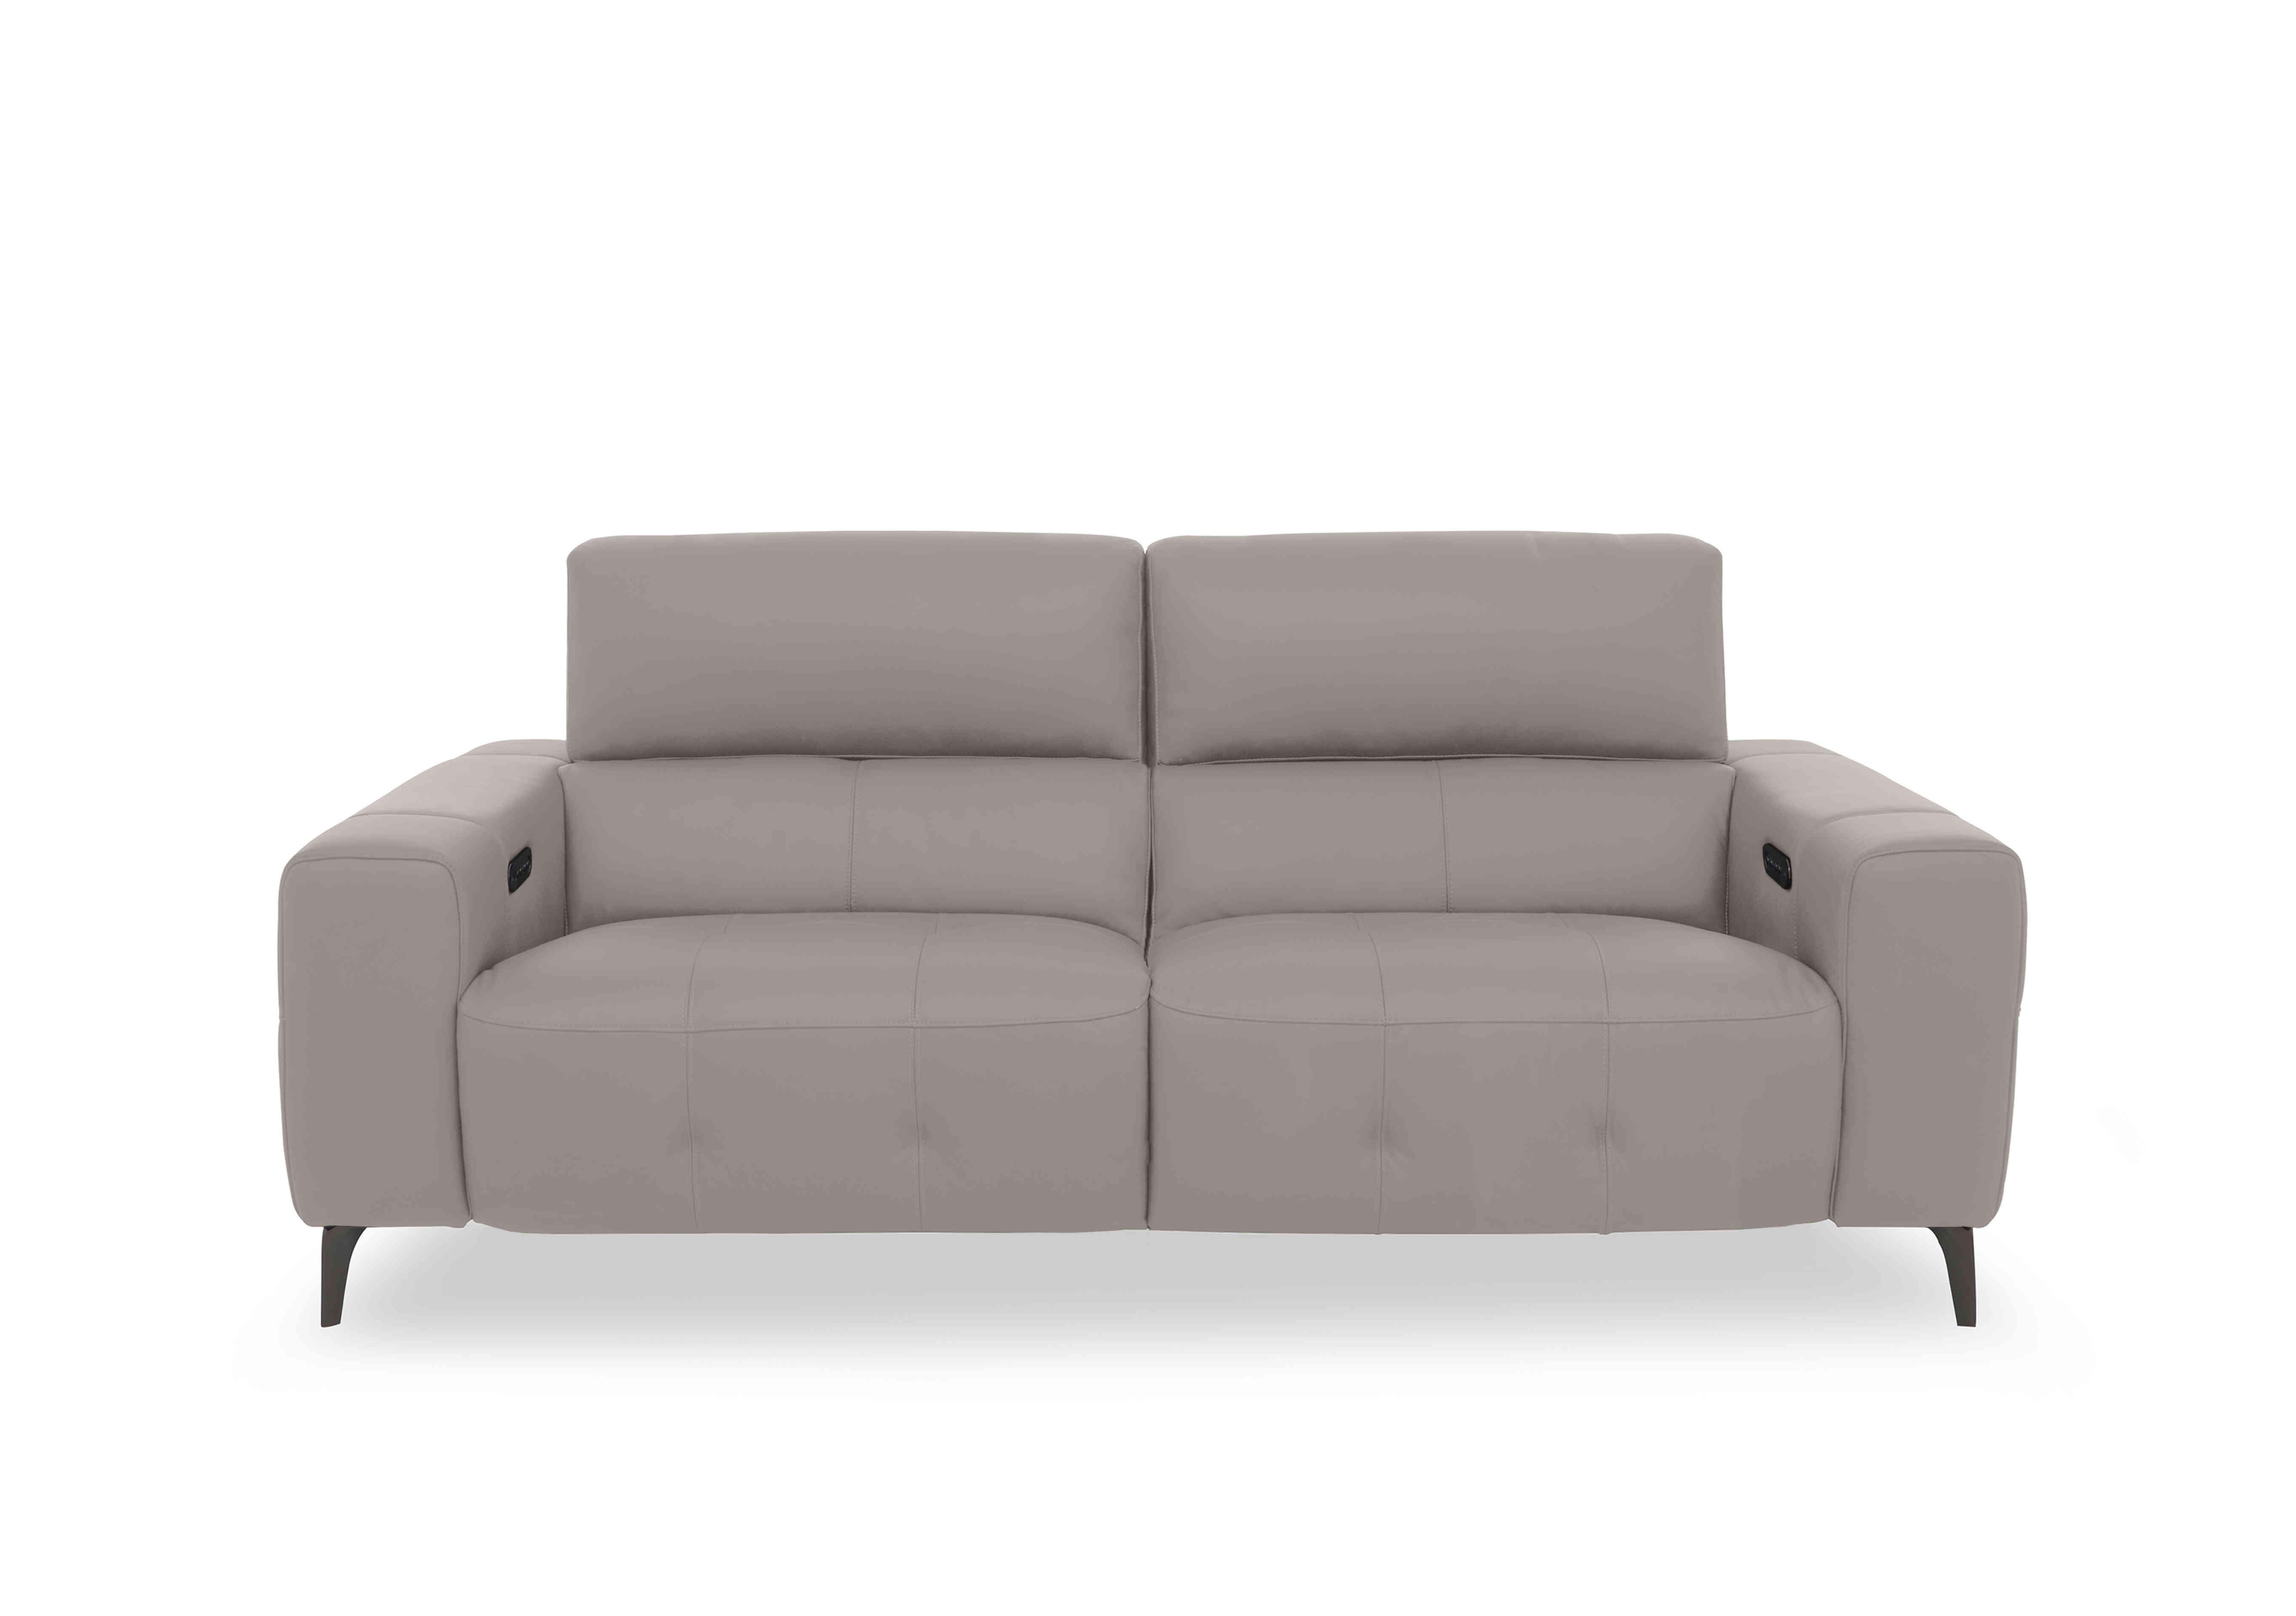 New York 3 Seater Leather Sofa in Bv-946b Silver Grey on Furniture Village